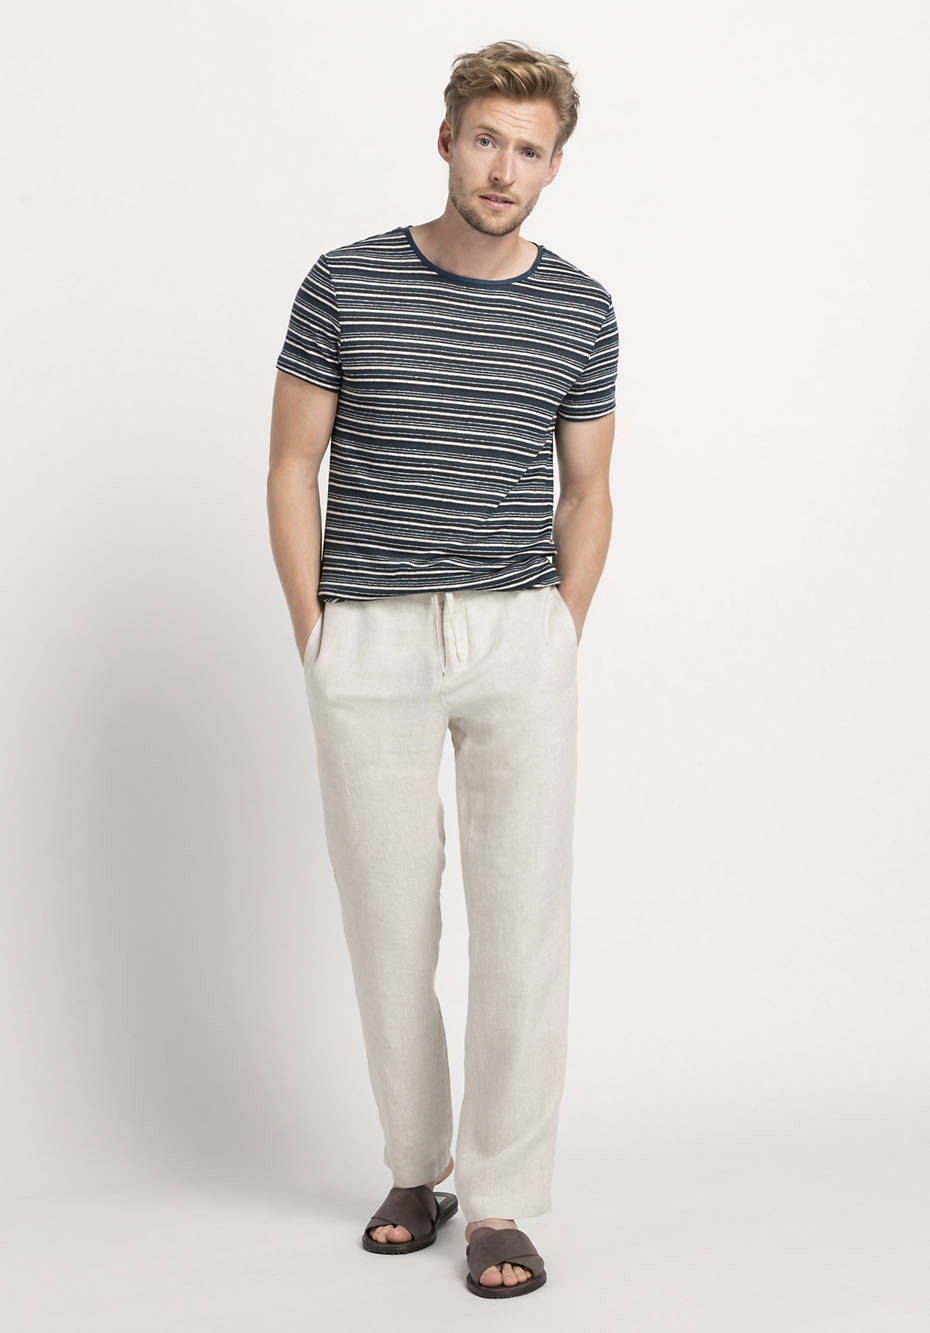 Trousers made from pure Hessen linen